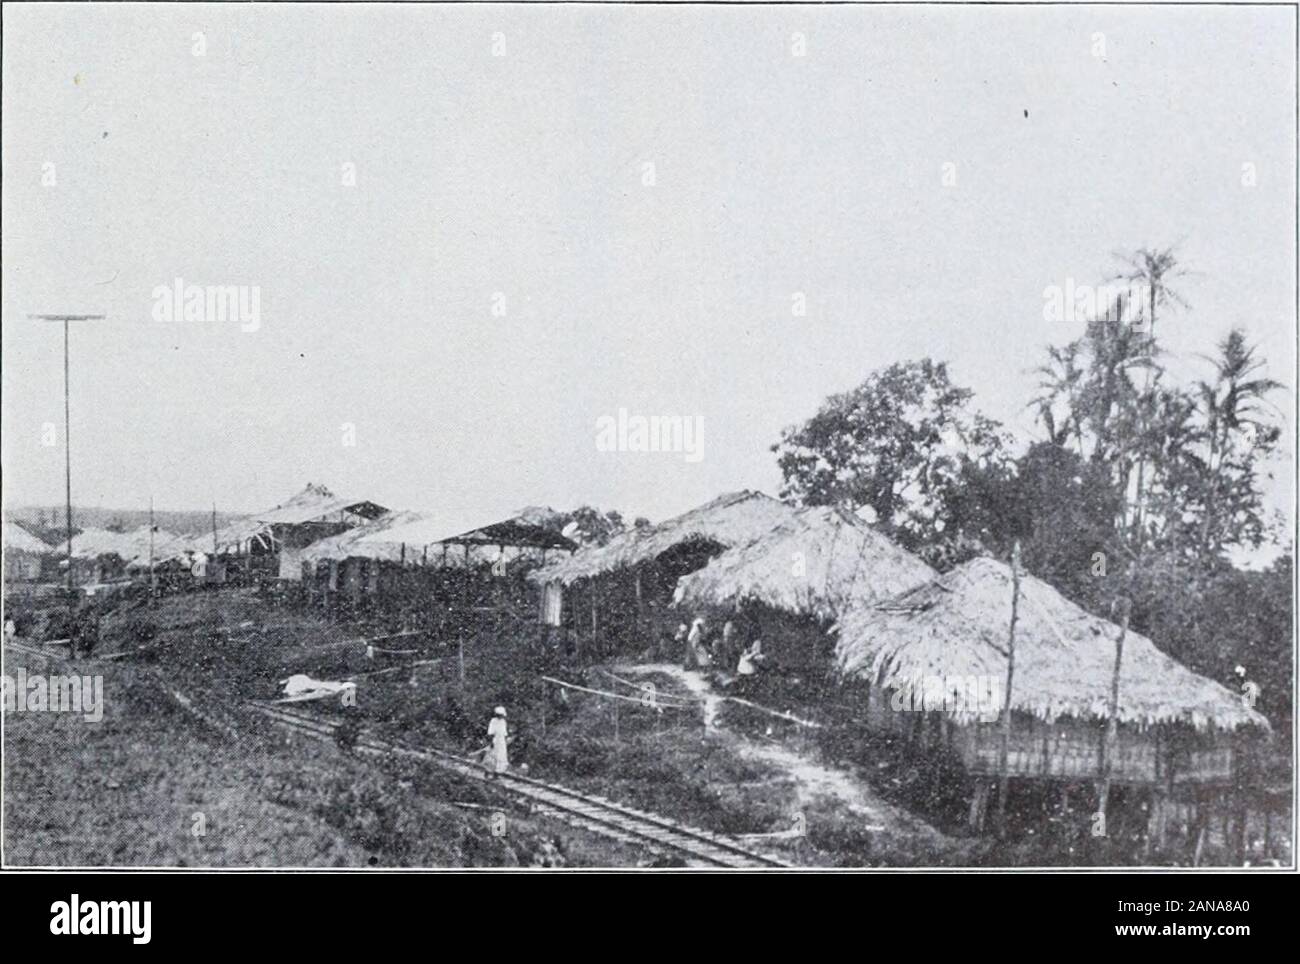 Report of first expedition to South America, 1913Members of the expedition: Richard PStrong [and others] . Fig. 1. — General Character of Dwellings in the Town.. Fig. 2. — General Character of Dwelling.s on Outskirts of Town. Plate I. — Buenaventura, Colombia. iQ ^^^m v  .  i.  Stock Photo